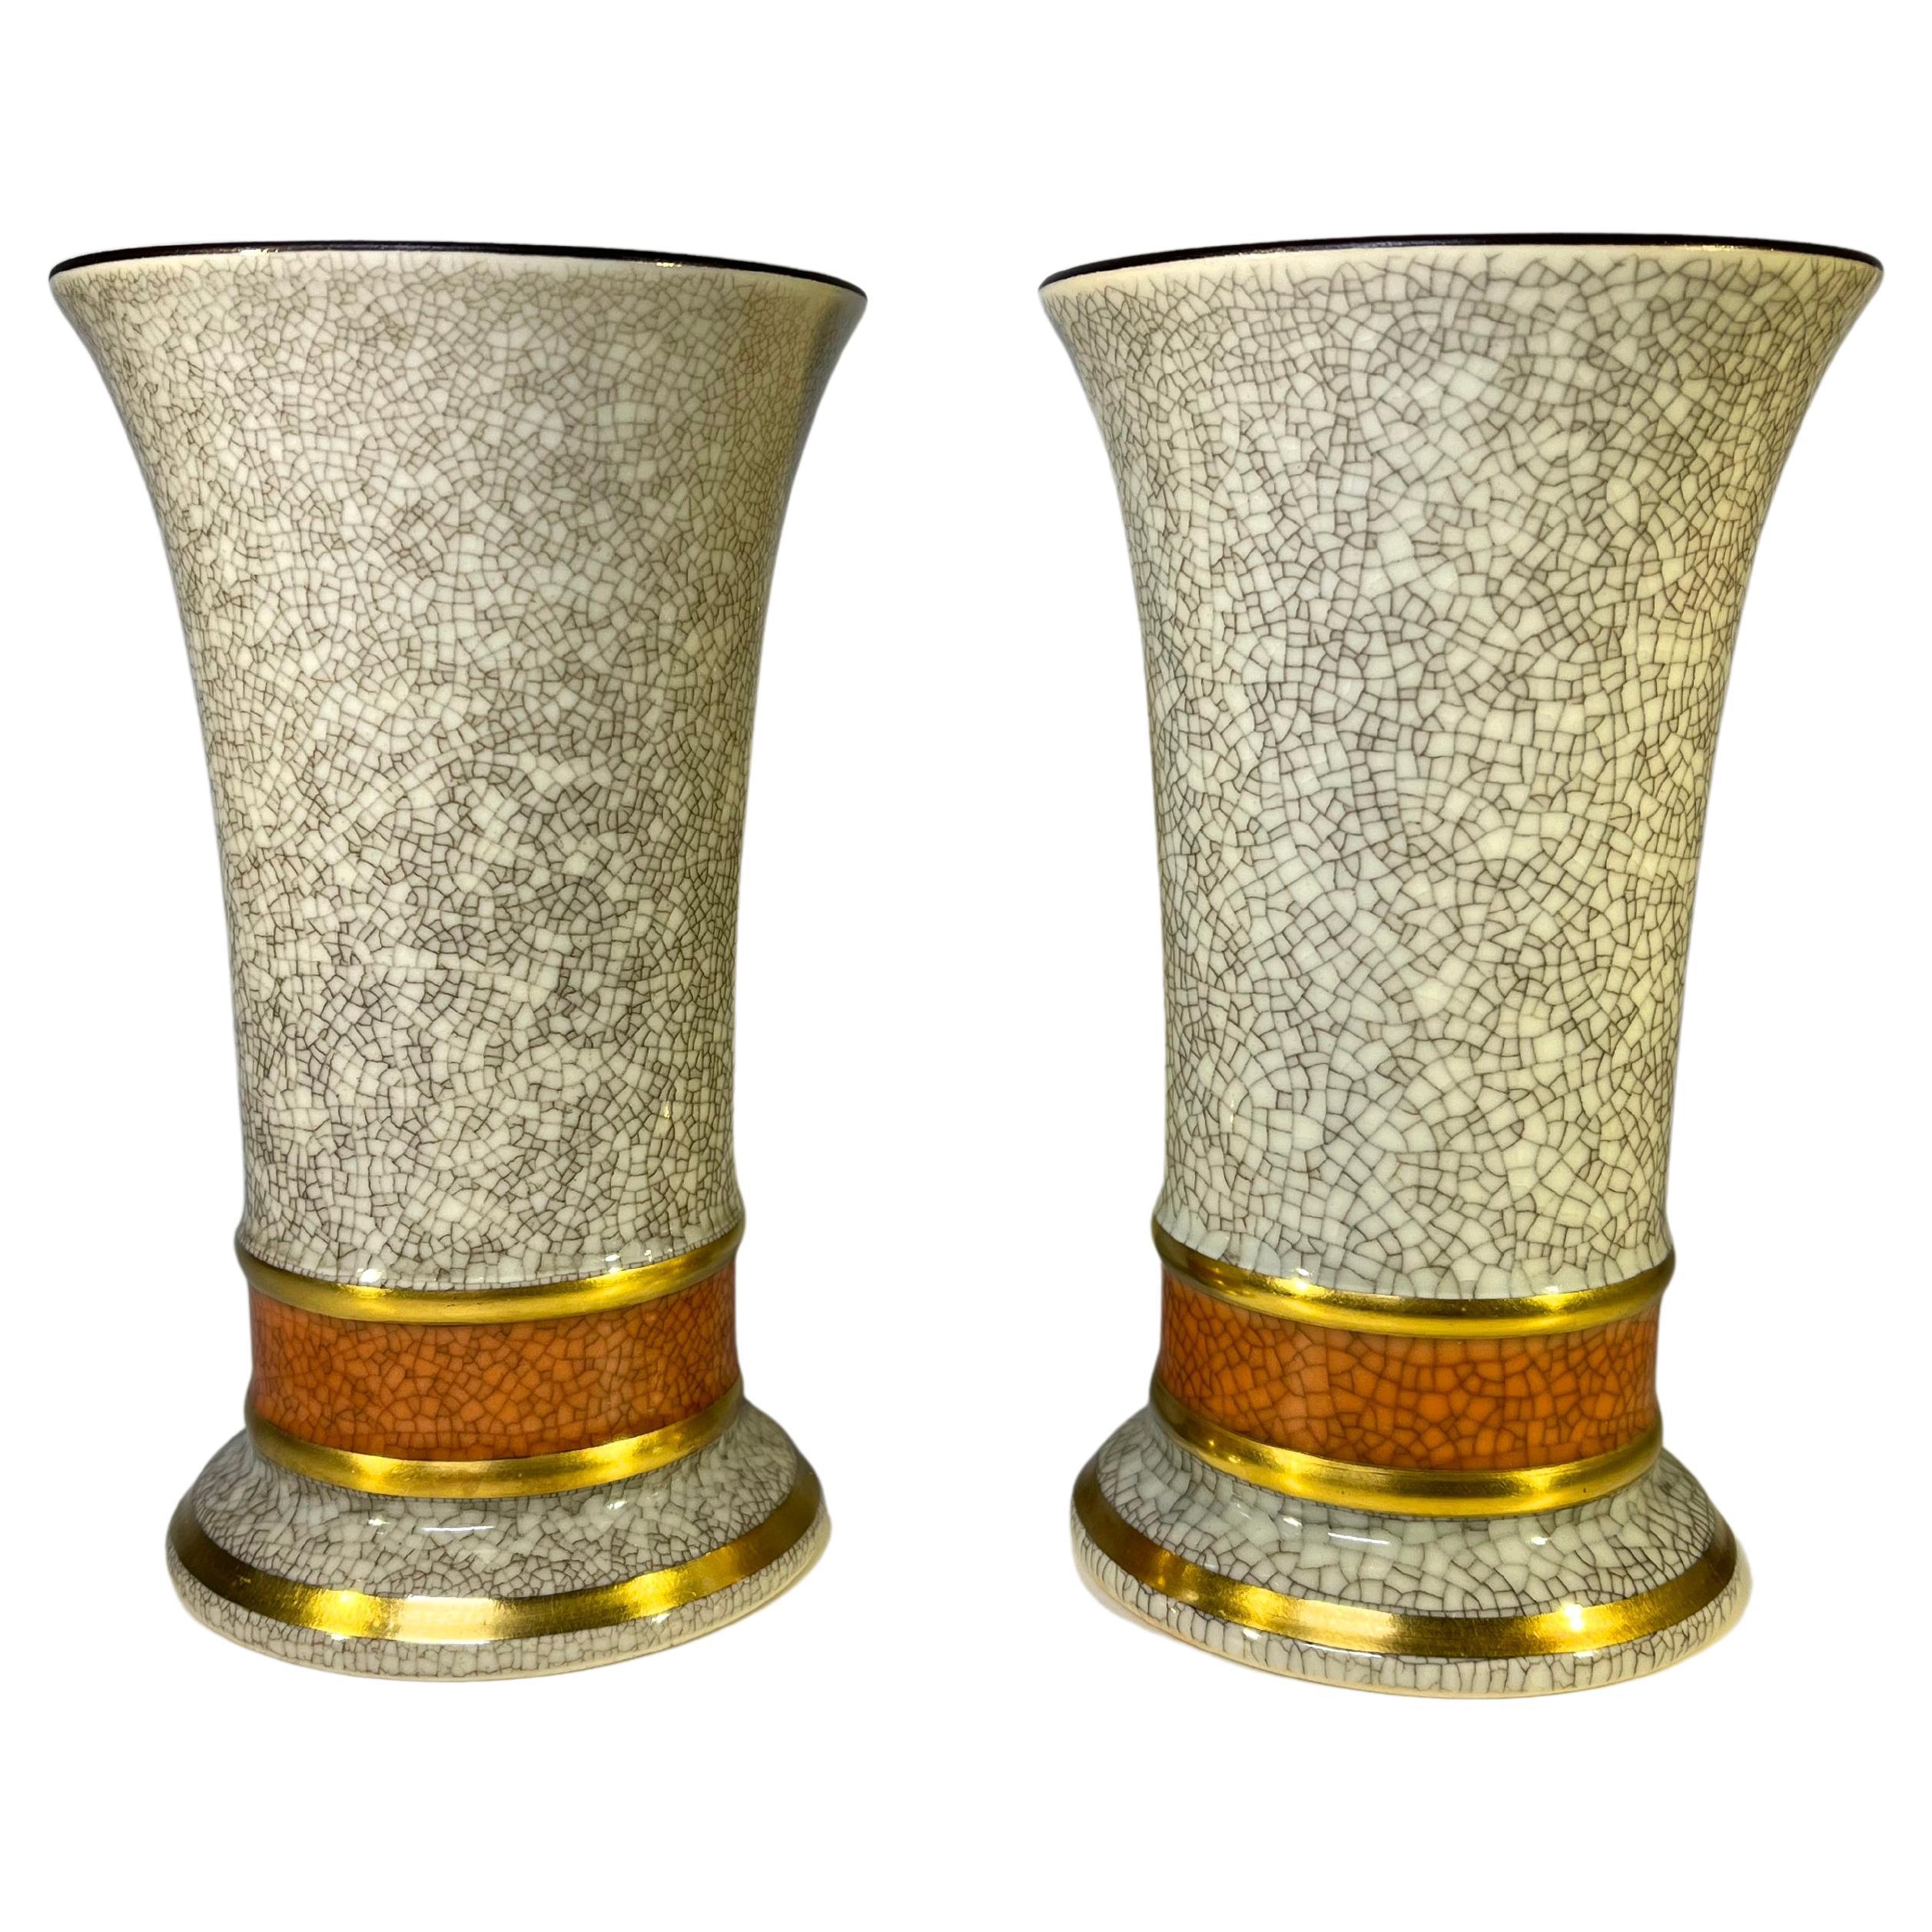 Two Royal Copenhagen, Grey Craquelé Vases with Terracotta and Gilded Bands #3462